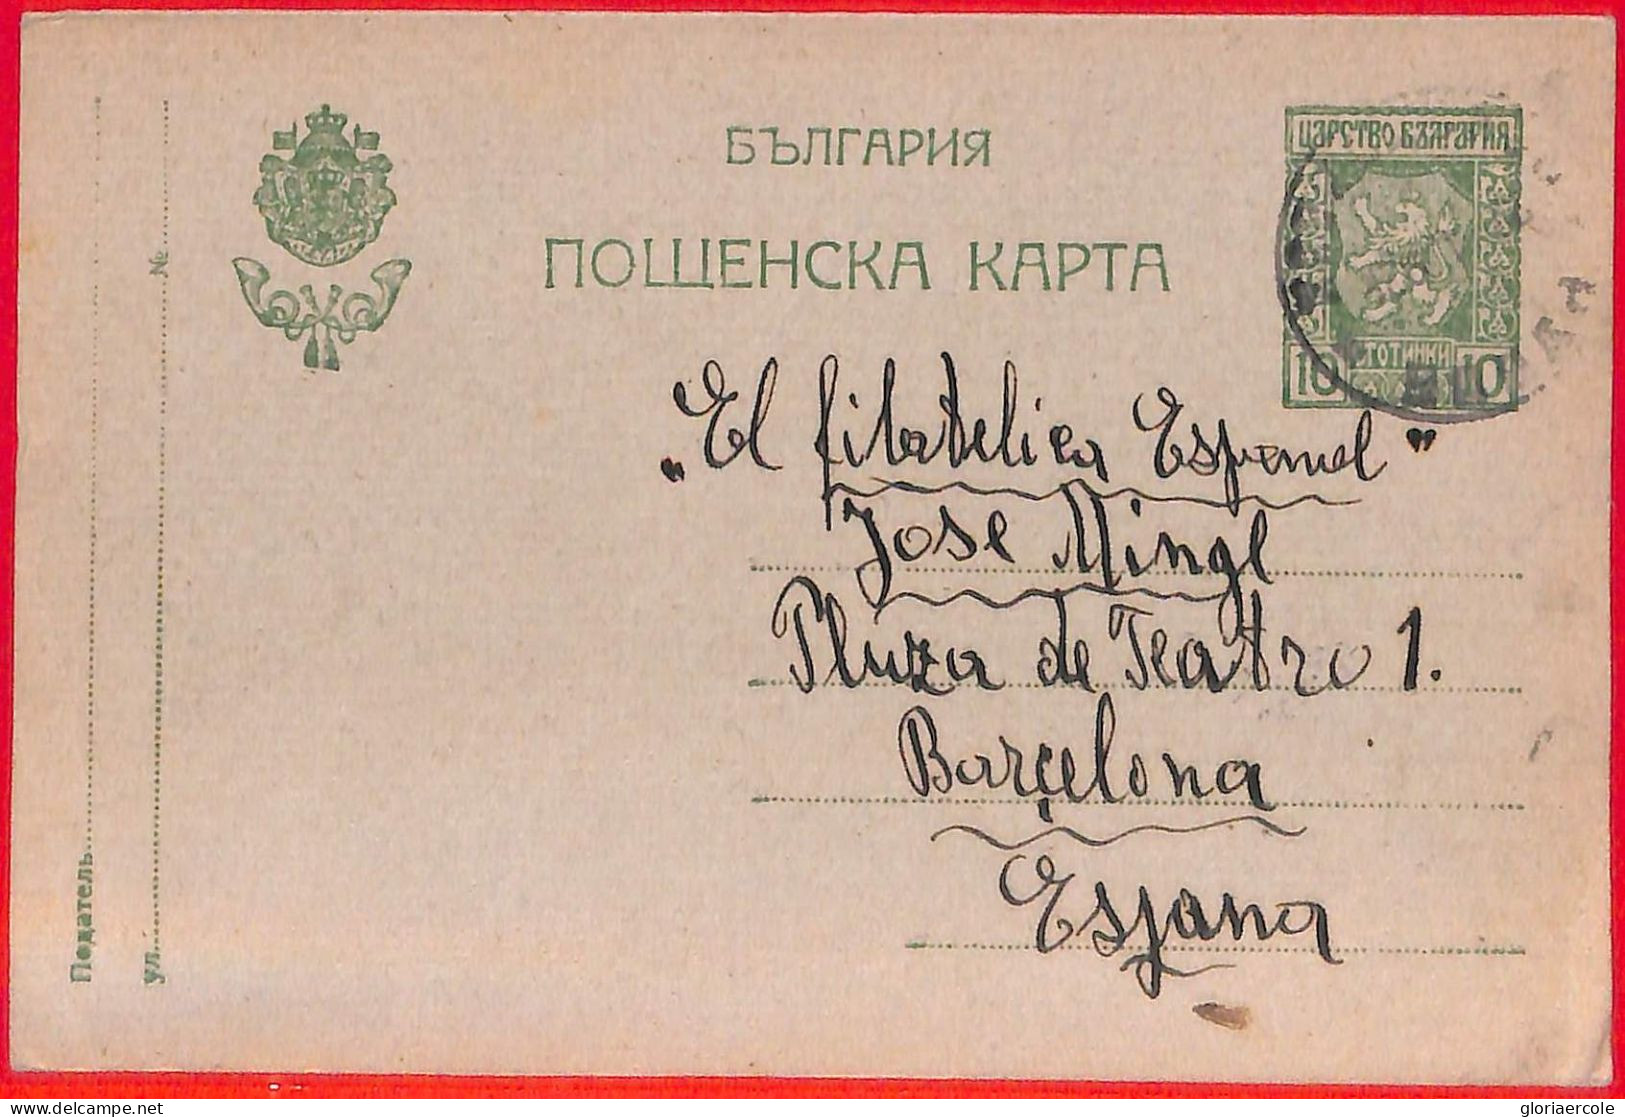 Aa0511 - BULGARIA - Postal History - STATIONERY CARD From ROUSTOUCK To SPAIN 1920's - Ansichtskarten